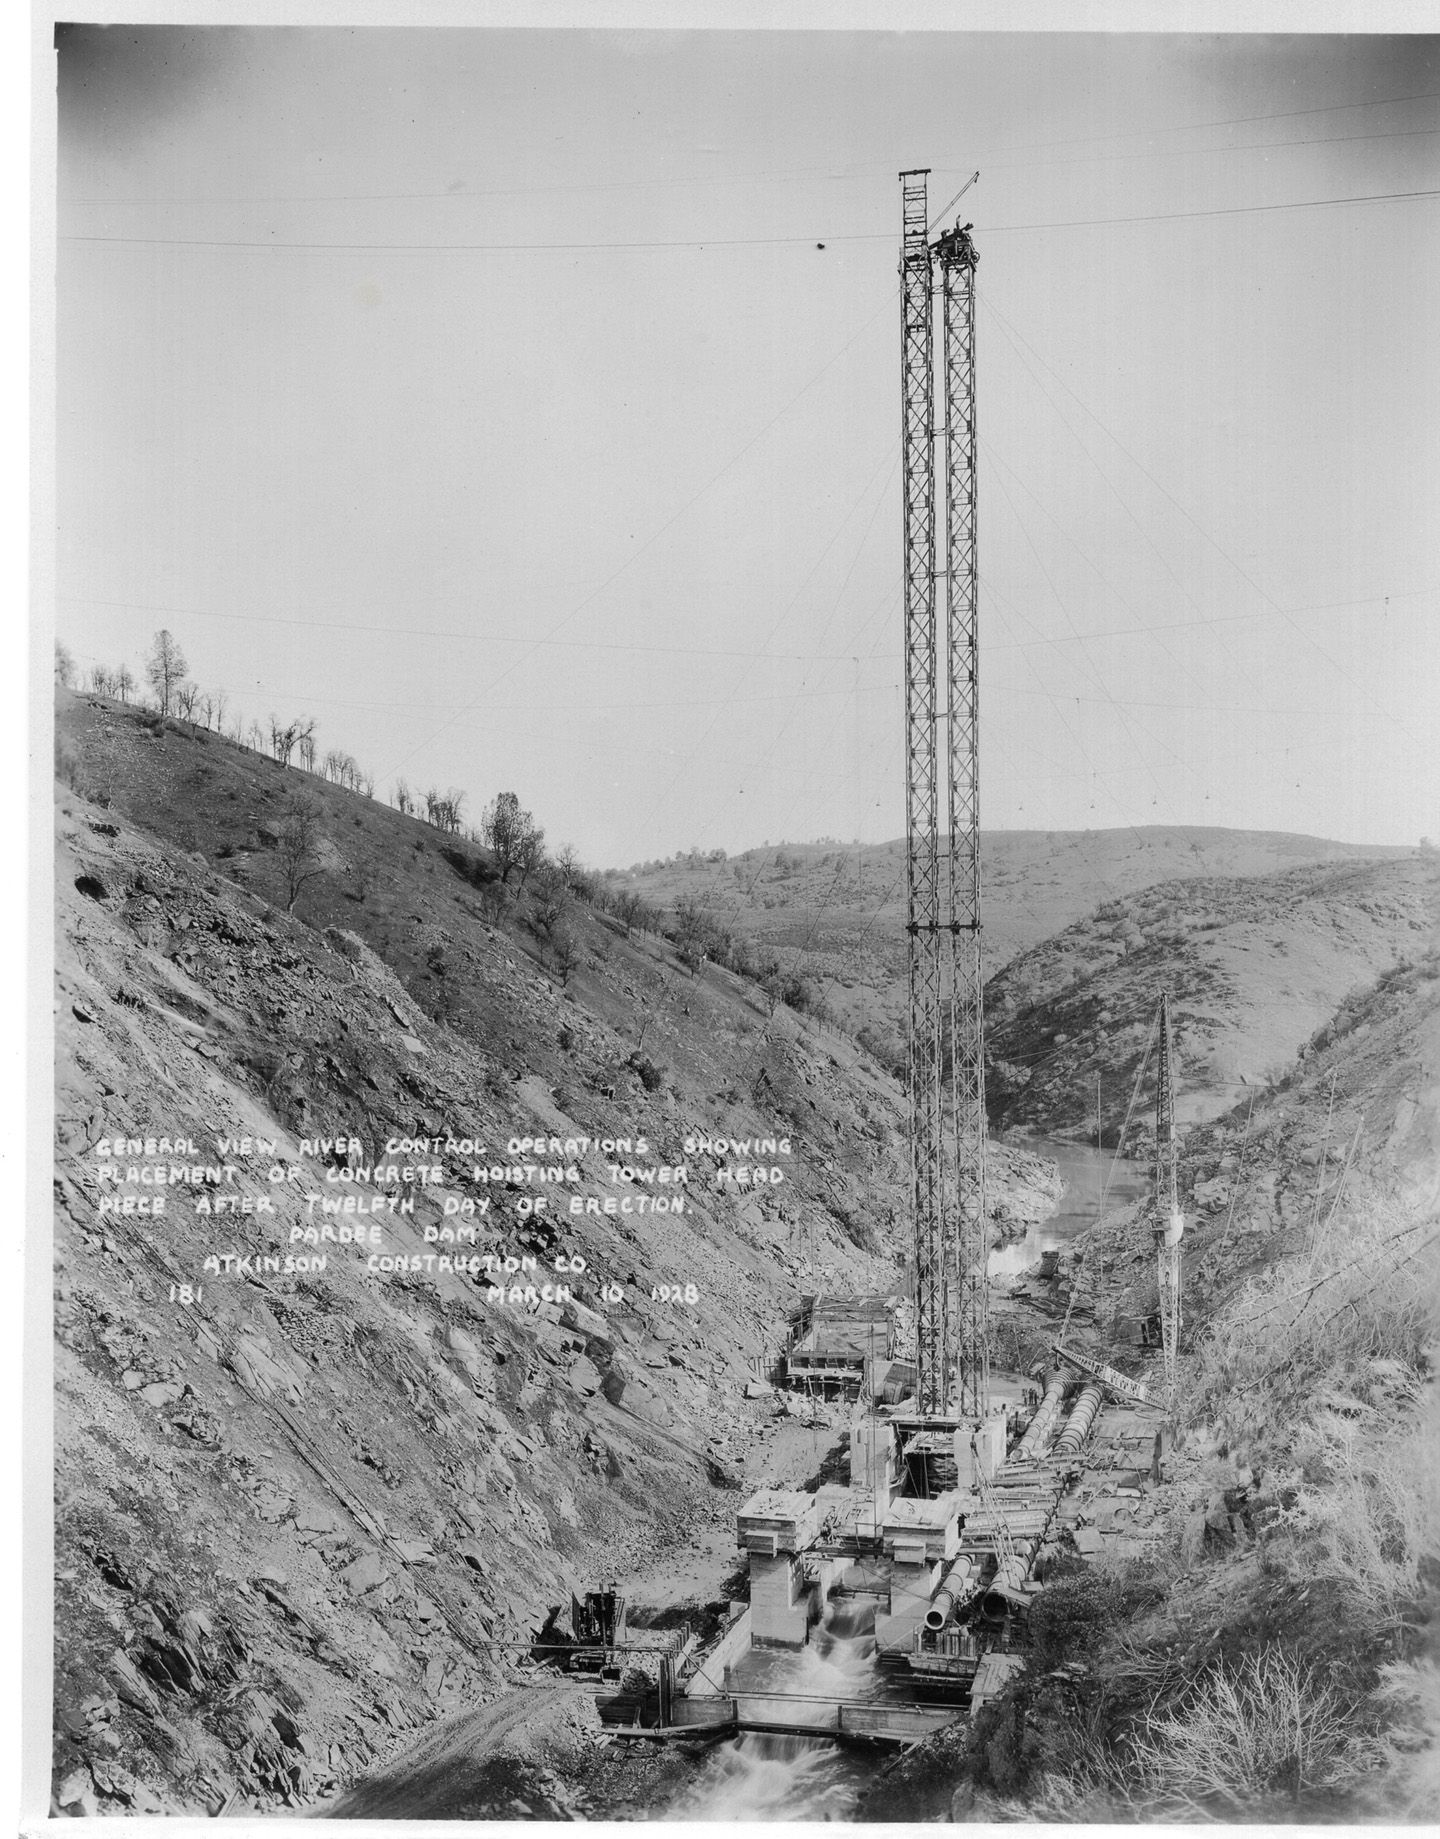 General view river control operations showing placement of concrete hoisting tower head piece after twelfth day of erection. (1928)	